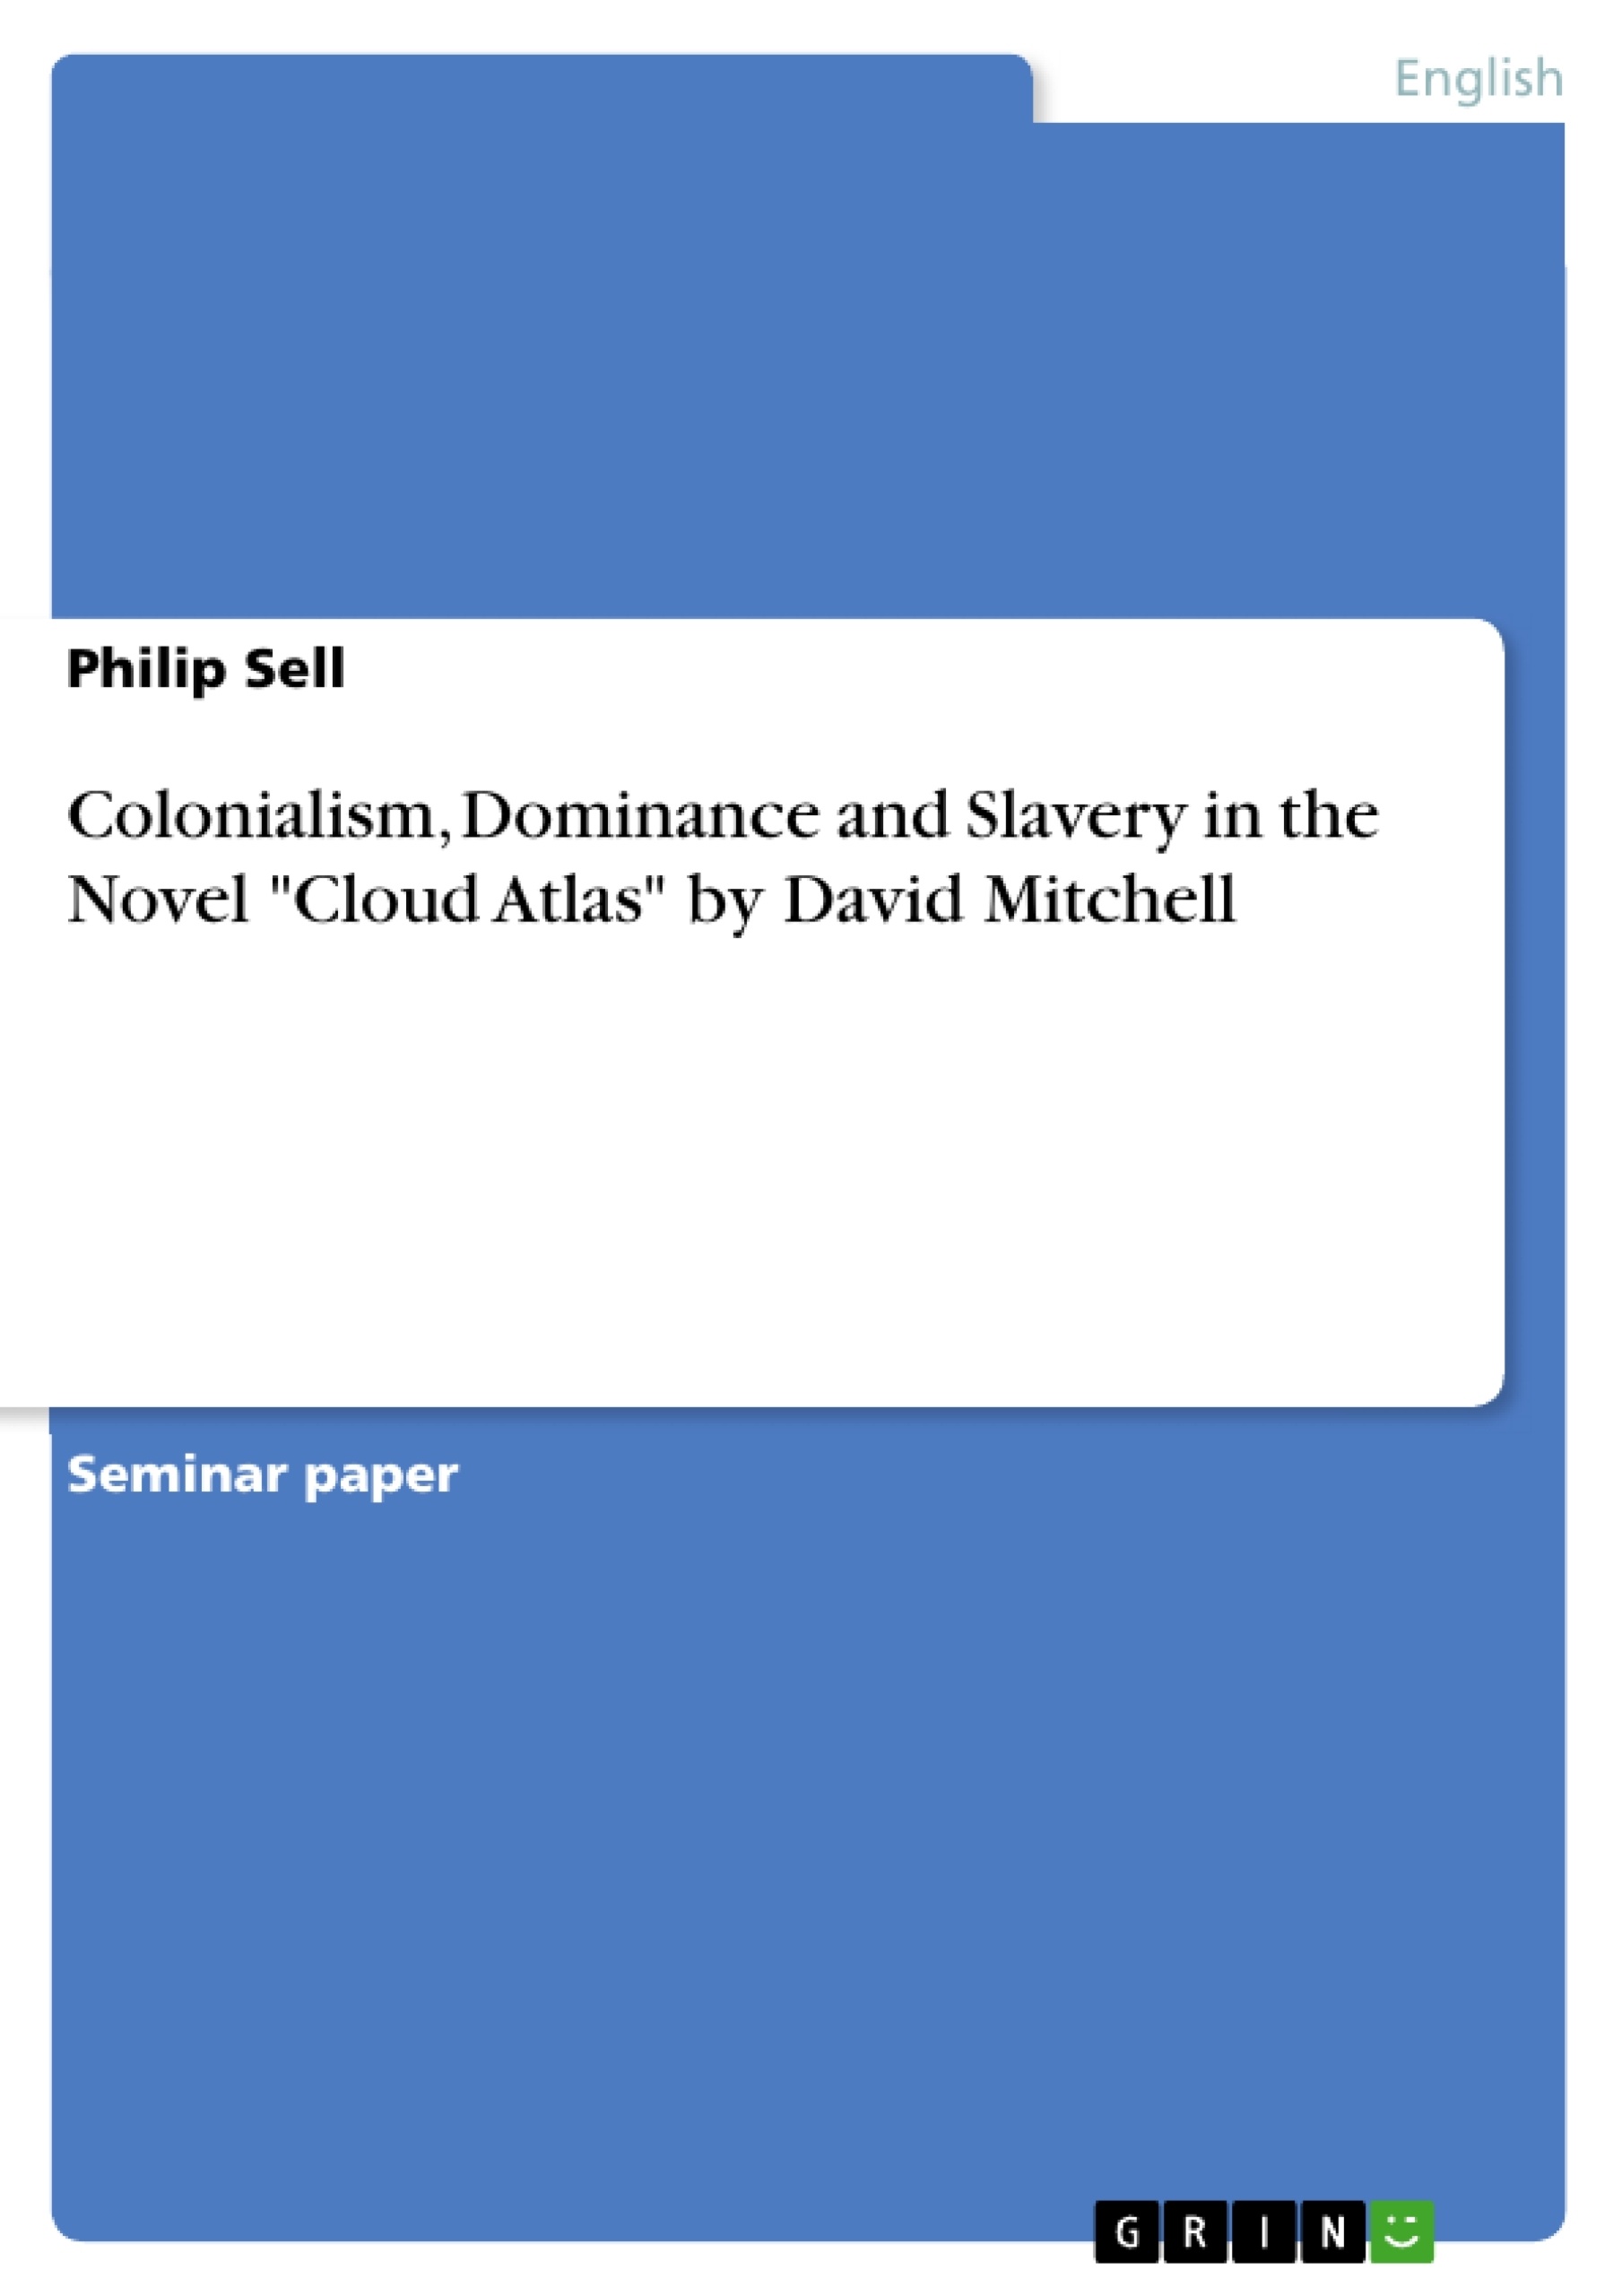 Title: Colonialism, Dominance and Slavery in the Novel "Cloud Atlas" by David Mitchell